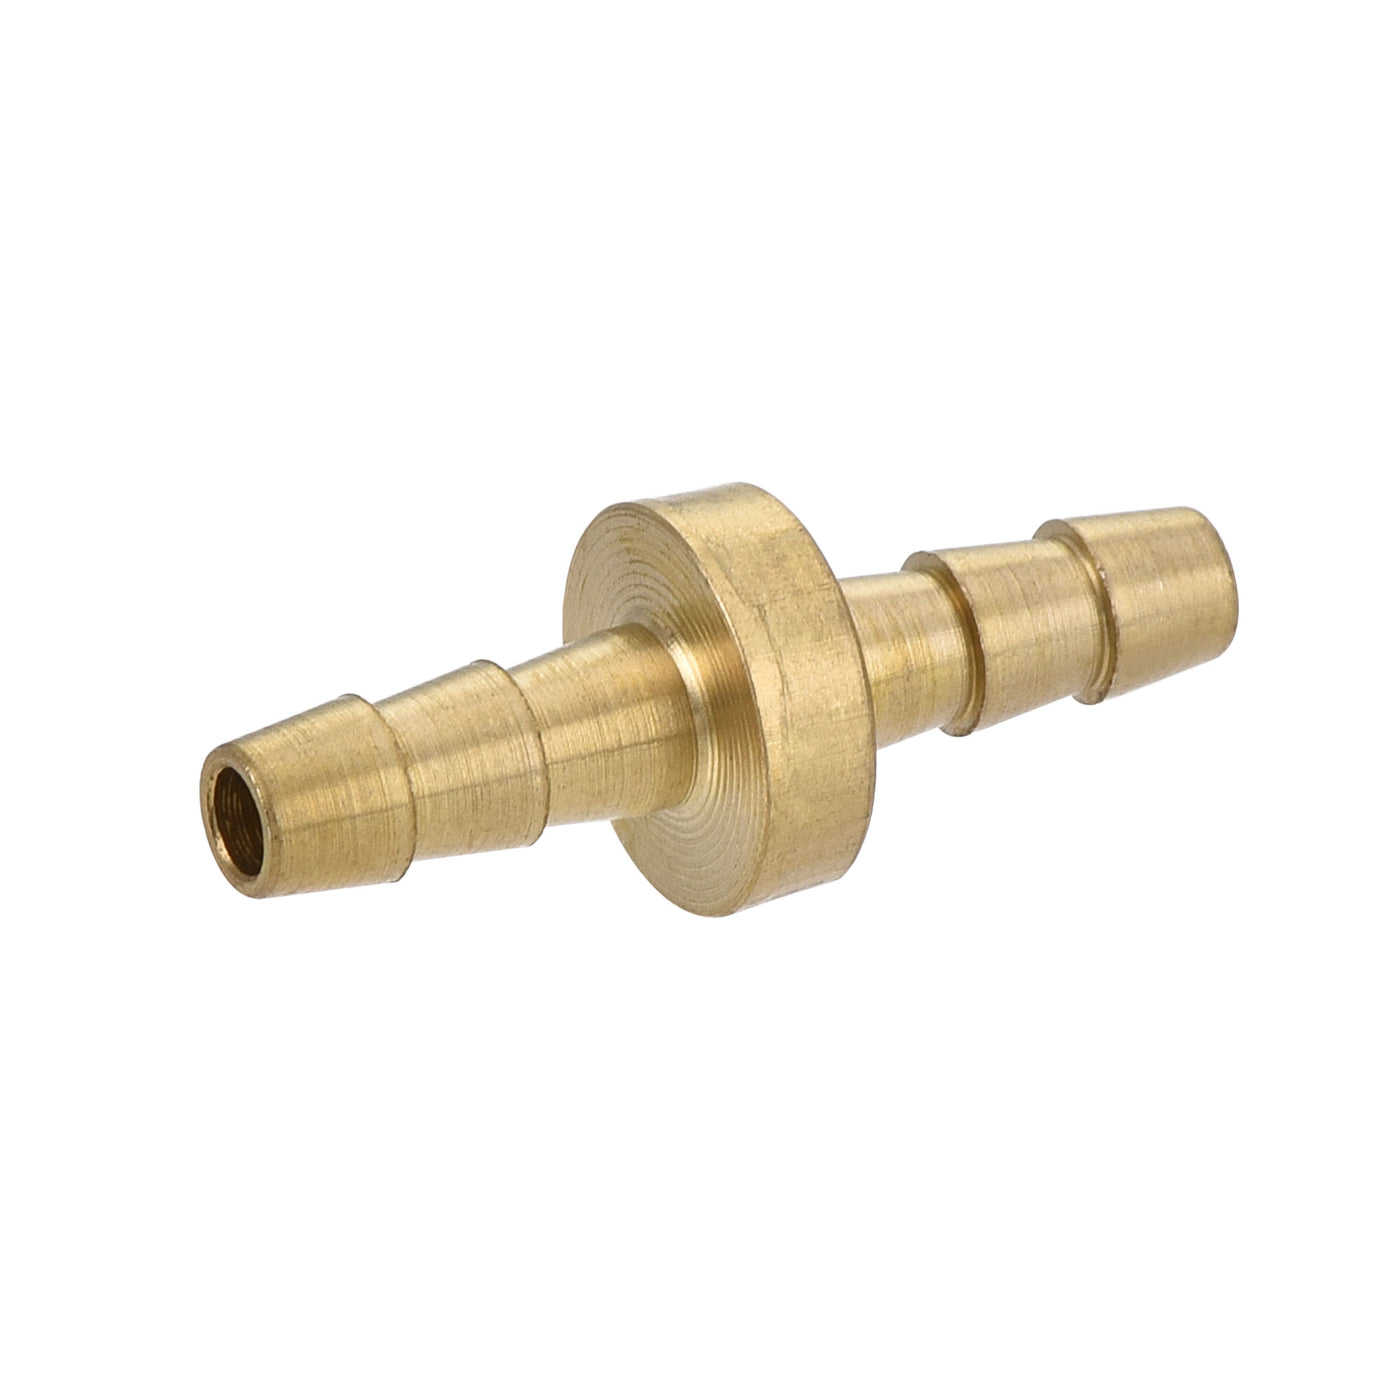 uxcell Uxcell Hose Barb Fitting, 1/8x1/8inch Brass Hollow Straight Quick Connector for Water Fuel Air Oil Gas, Pack of 2